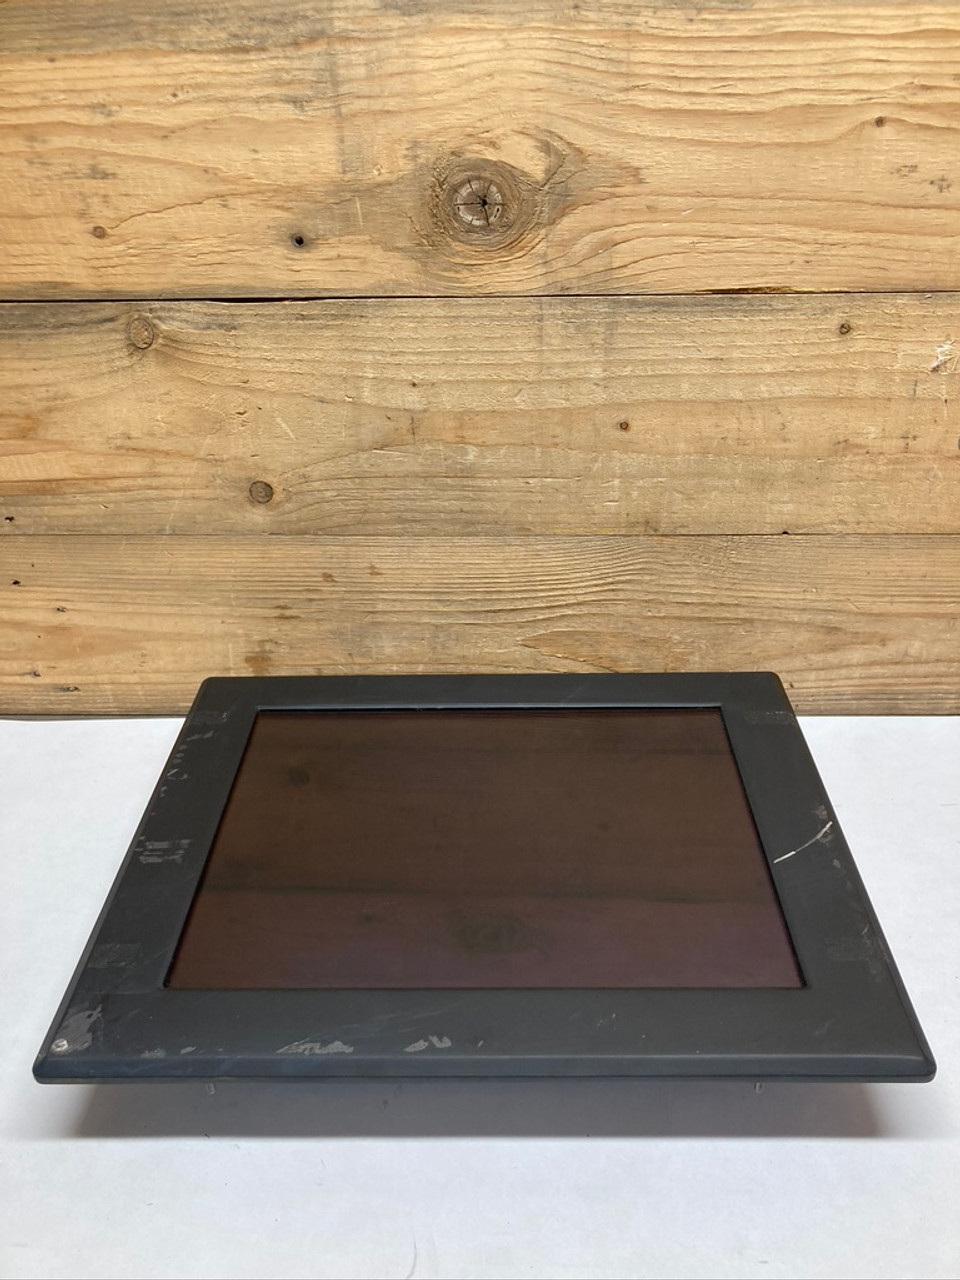 15" LCD (Touch) Monitor R15L600 Winmate (Used)